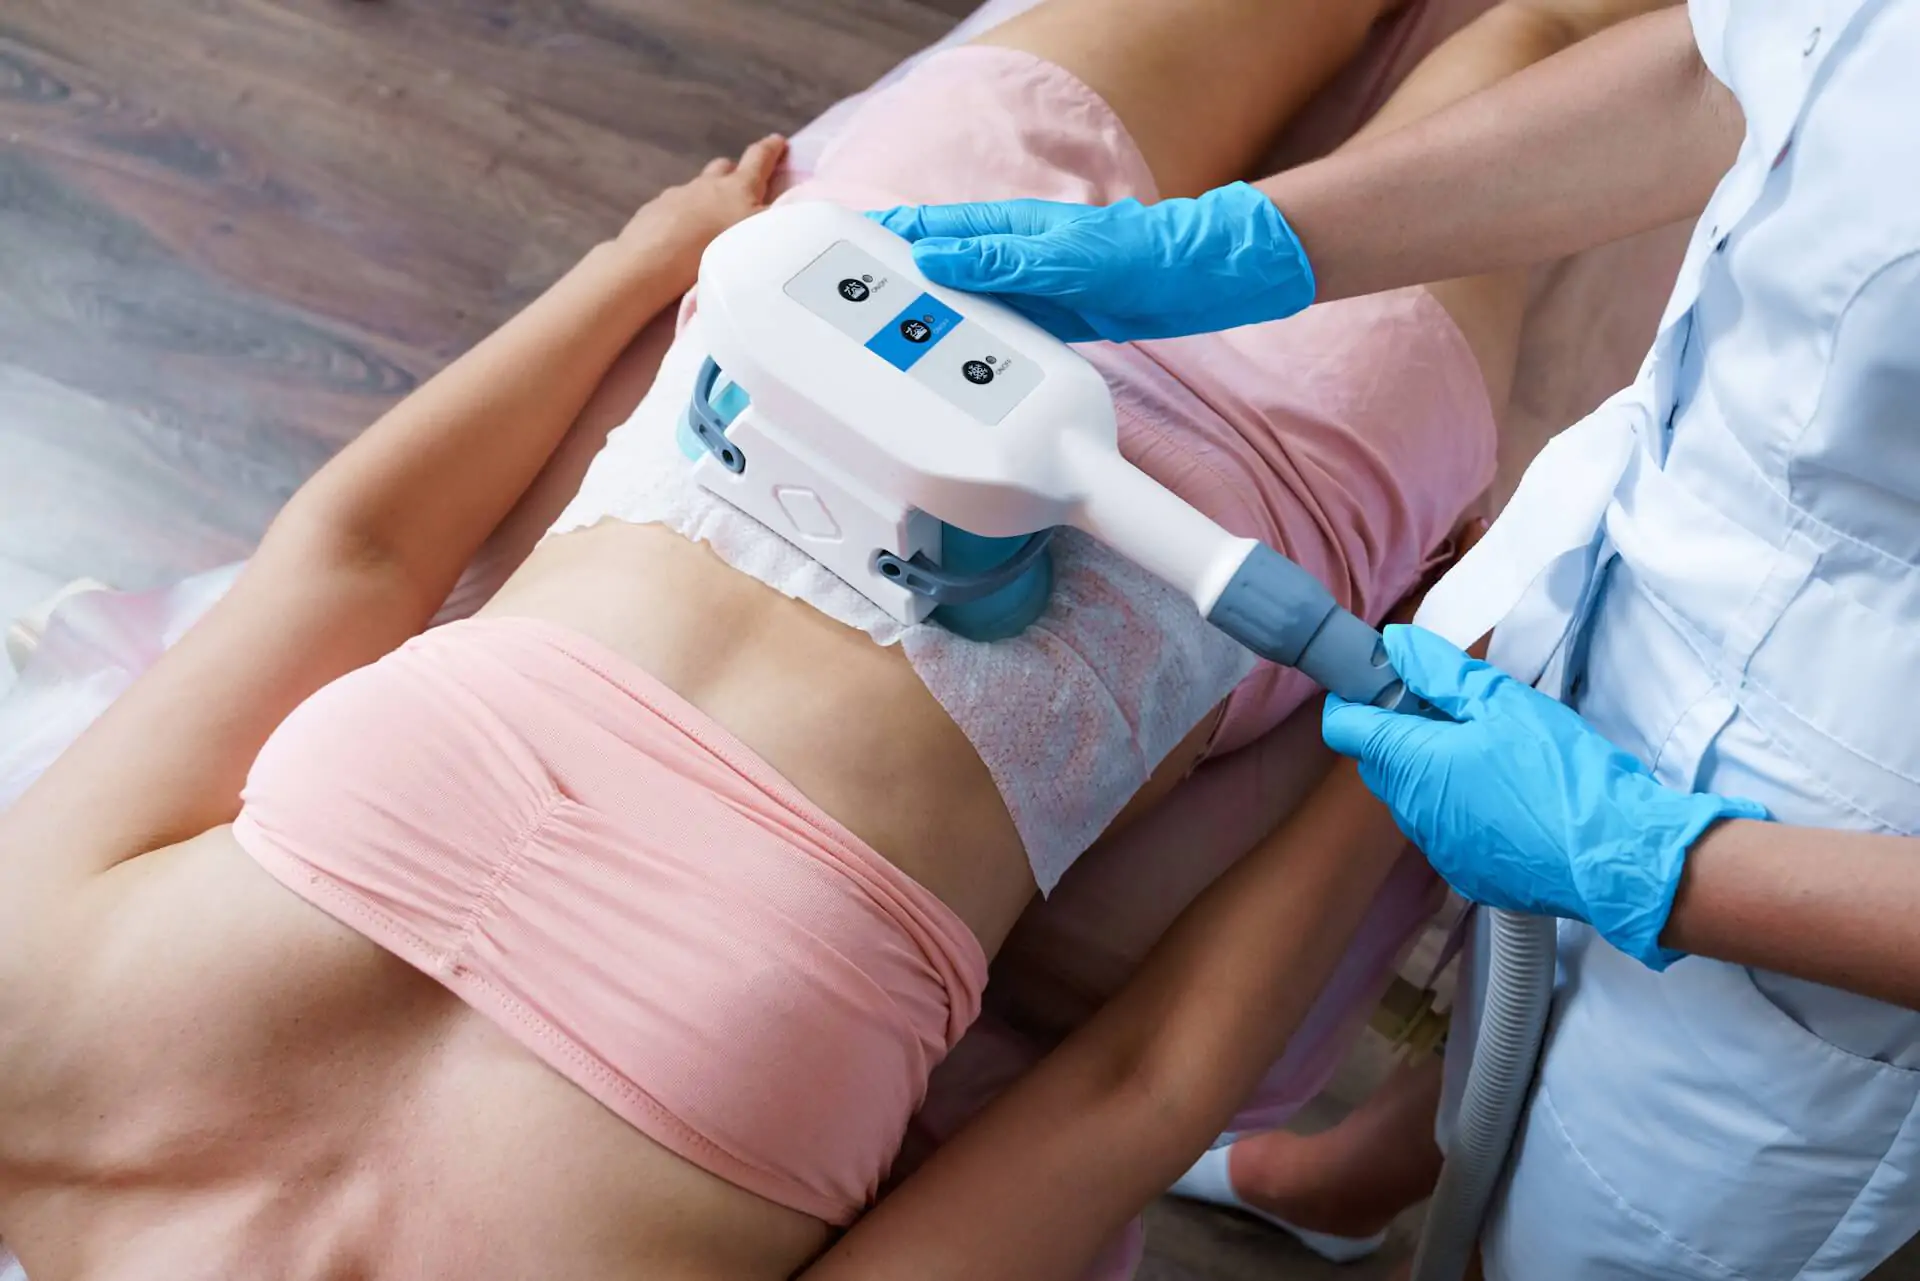 Transform Your Body with CoolSculpting at Doc Smith Medical in Bradenton